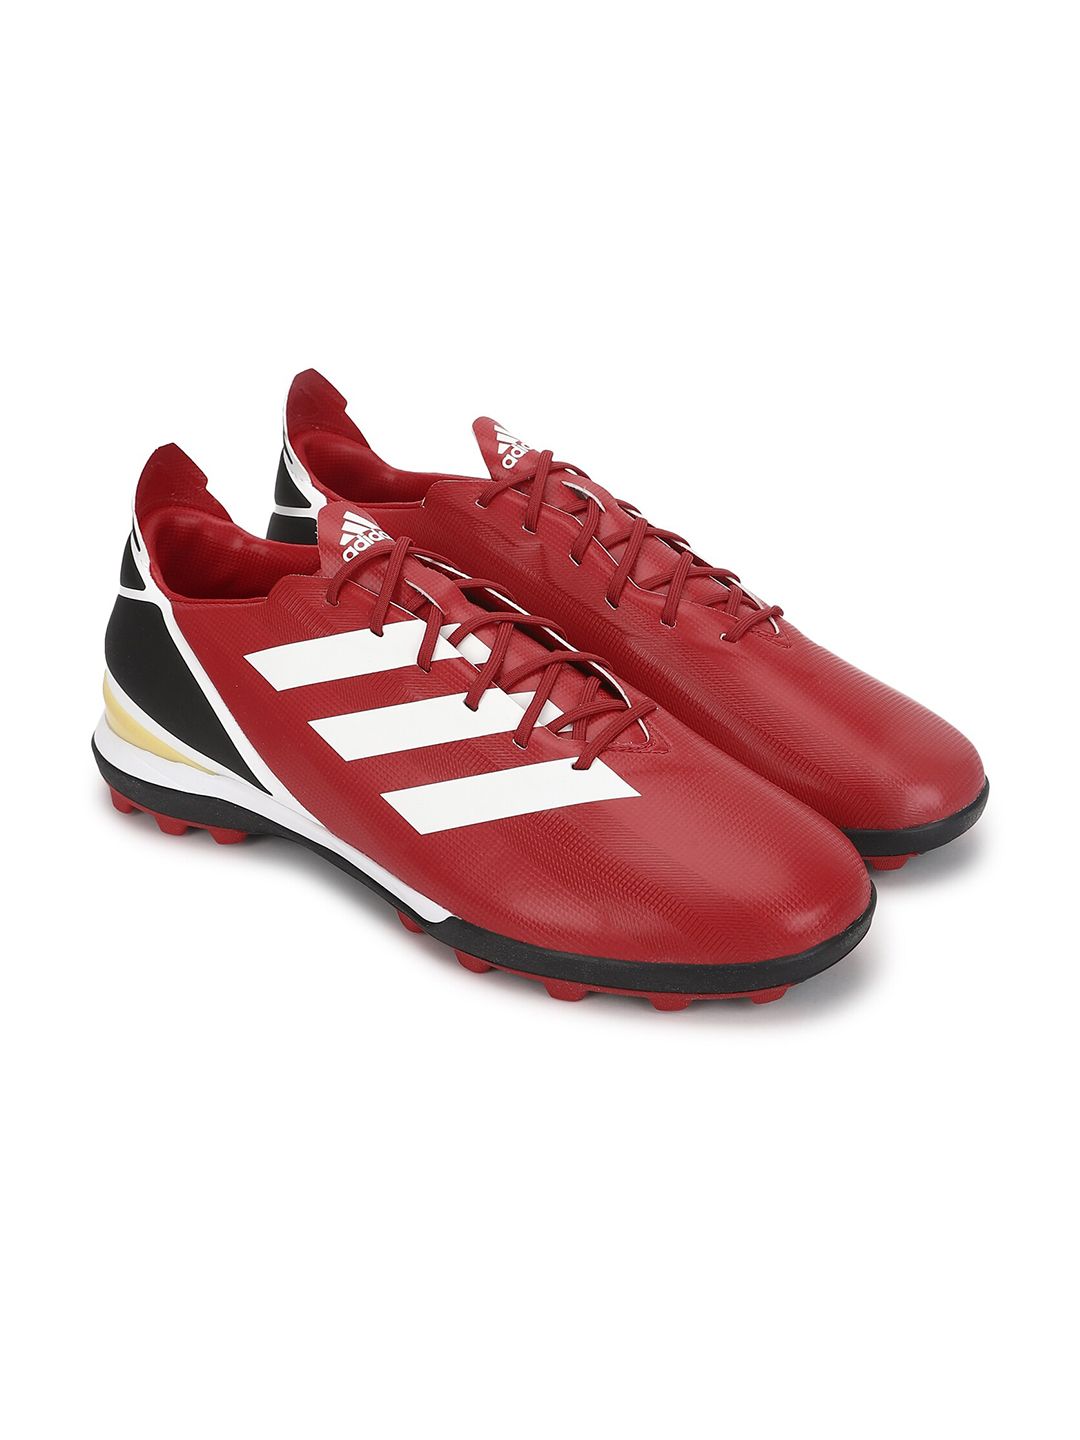 ADIDAS Unisex Red Printed Football Shoes Price in India